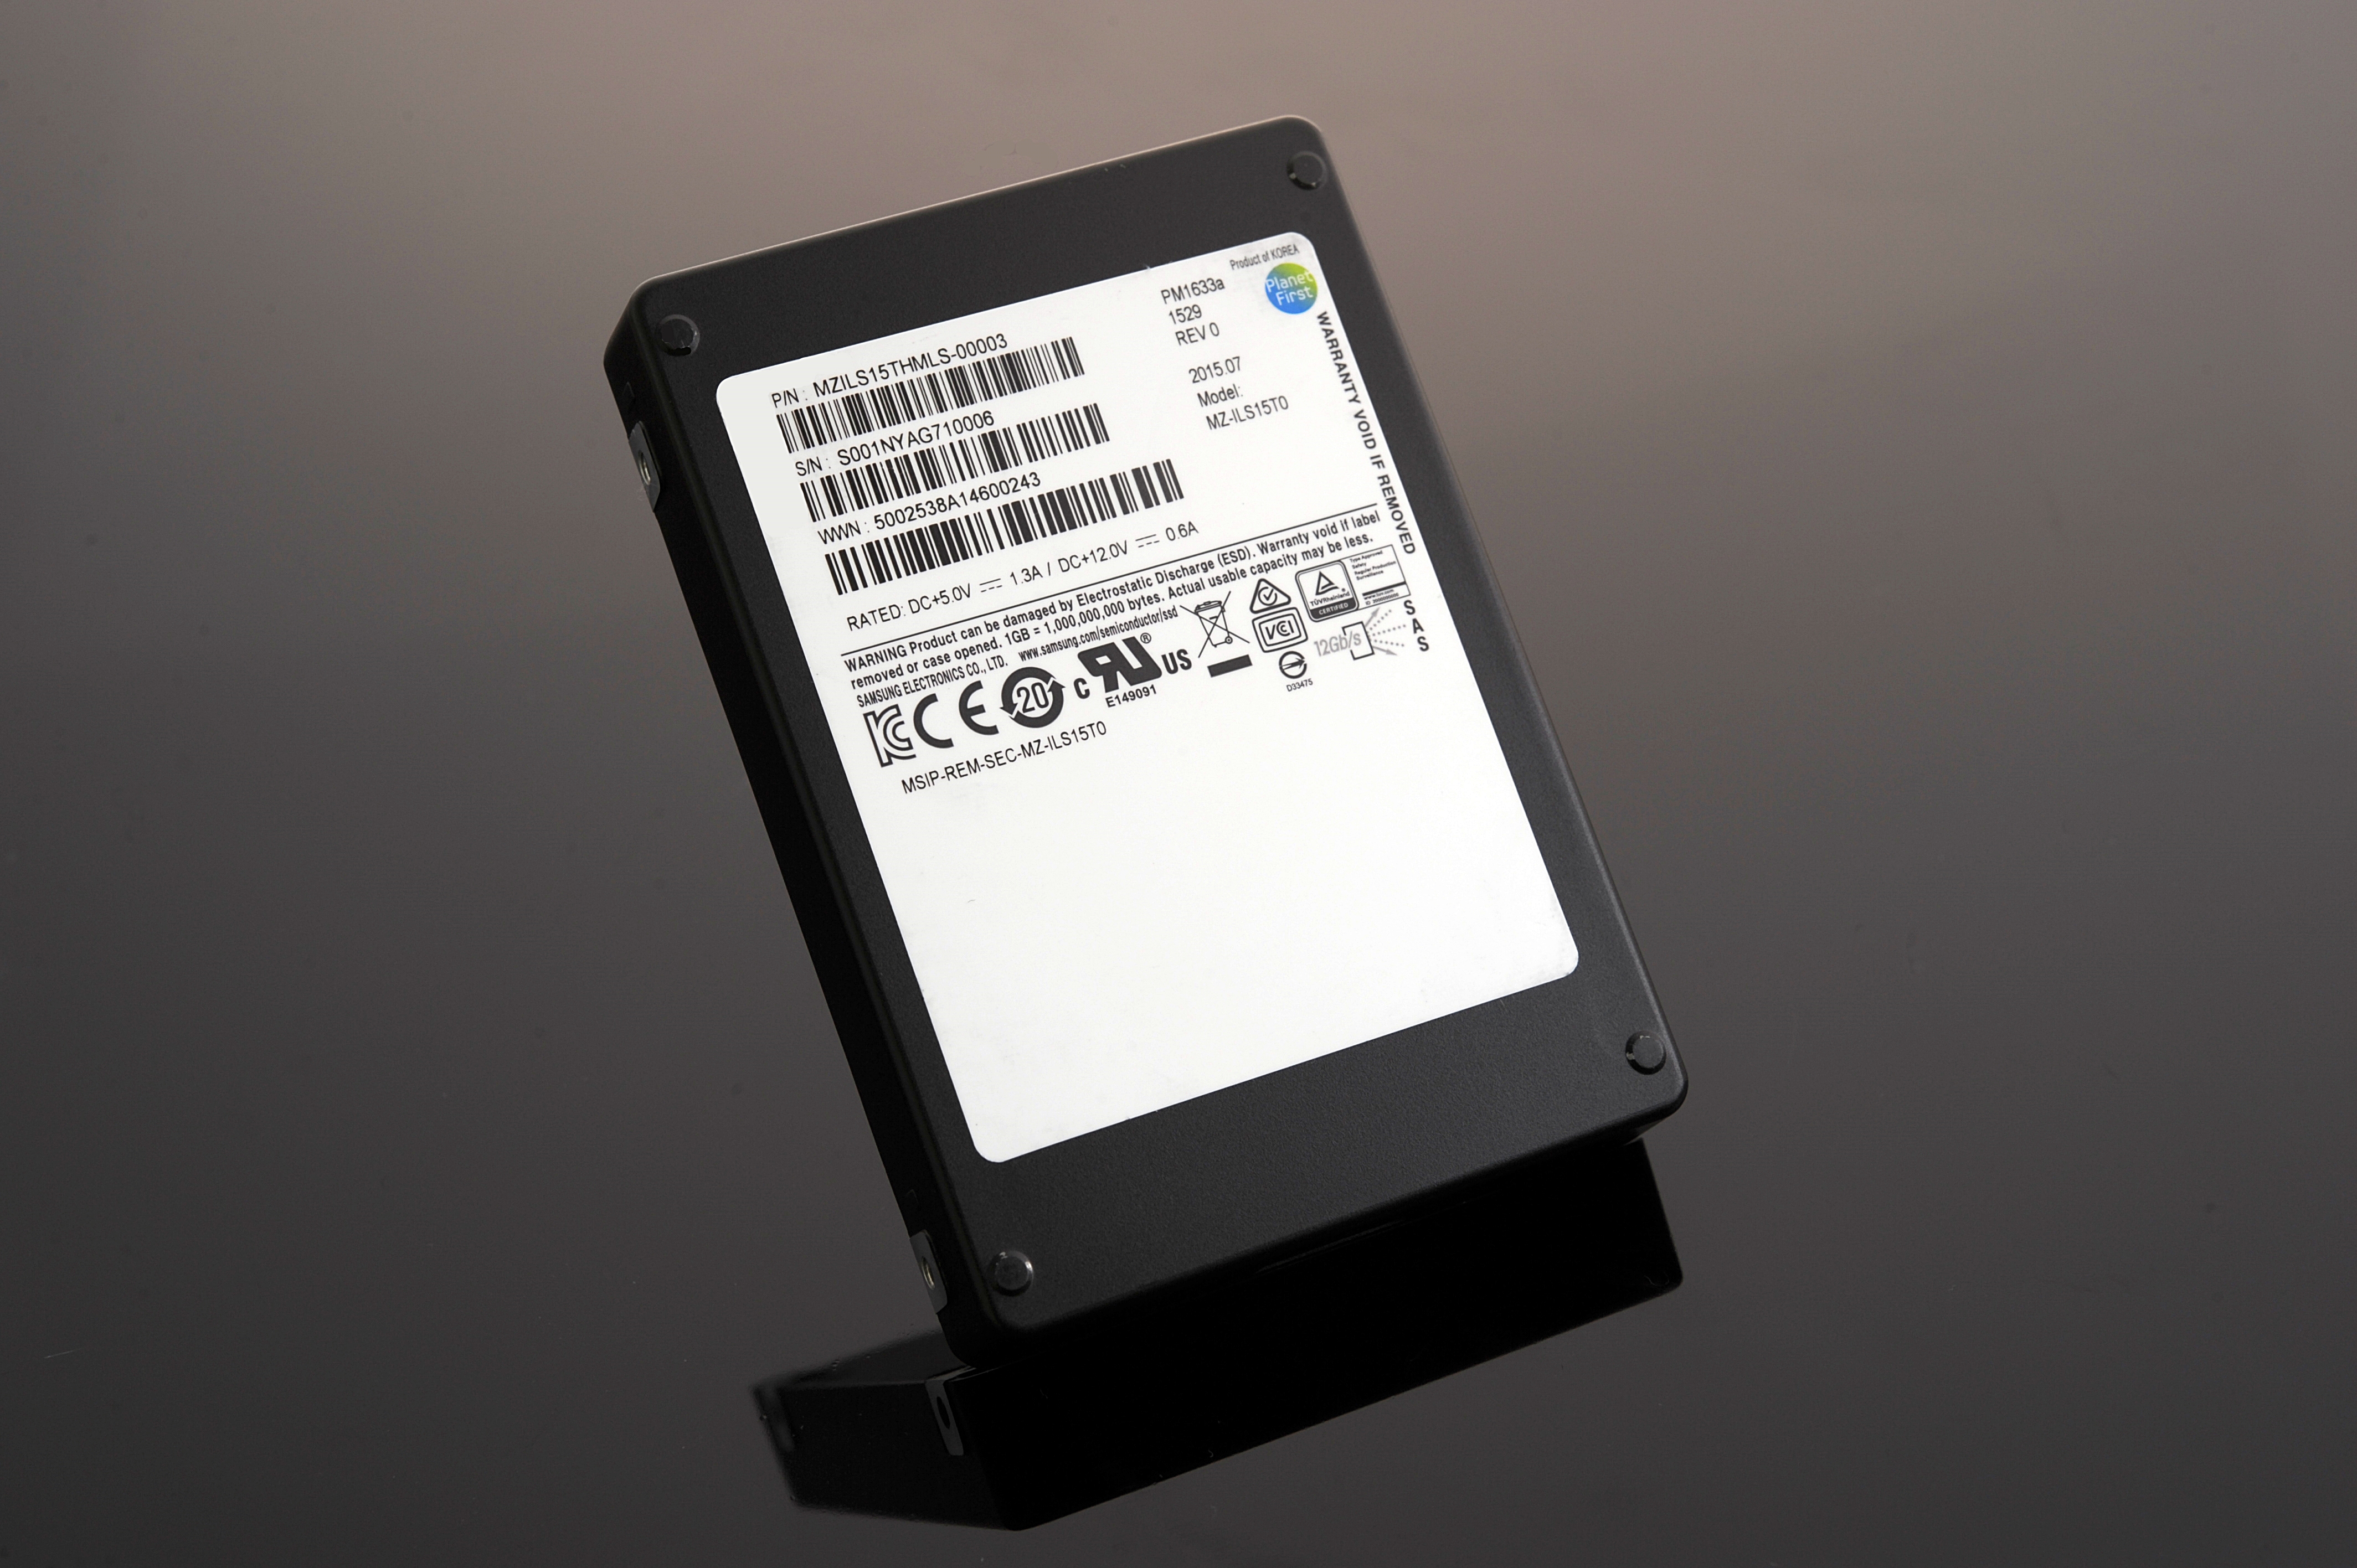 Plantation to play Assault Samsung Introduces World's Largest Capacity (15.36TB) SSD for Enterprise  Storage Systems – Samsung Global Newsroom